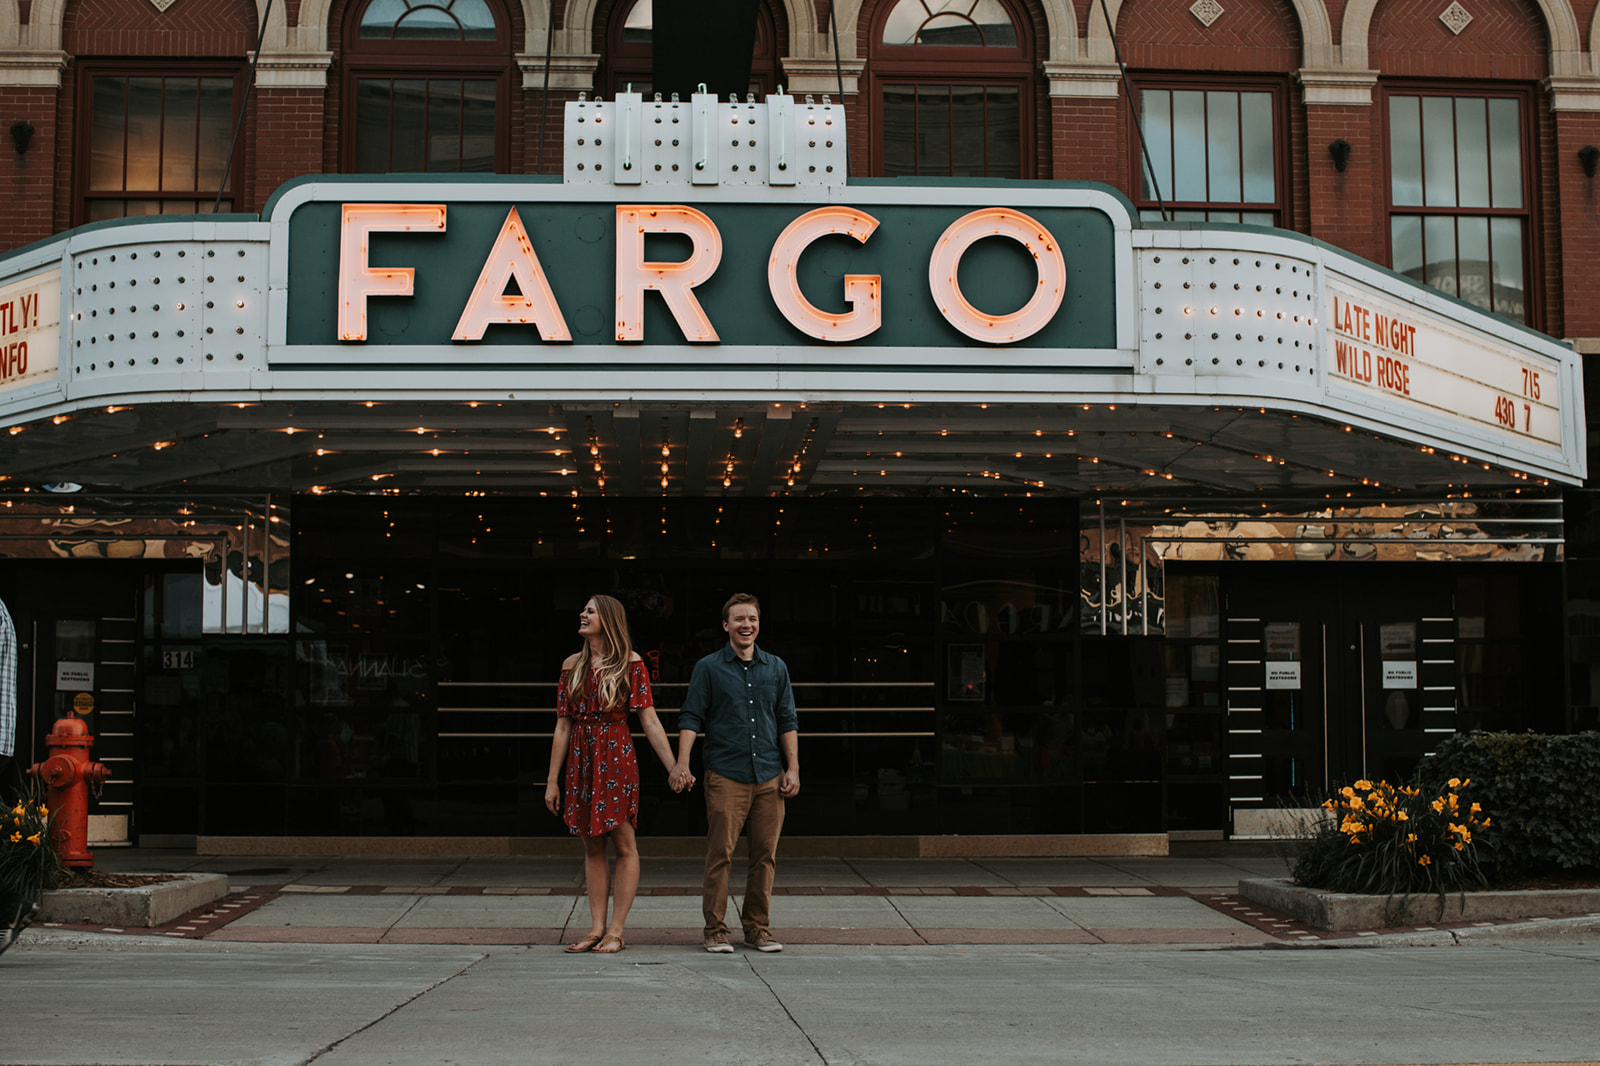 Downtown Fargo Engagement Session by Abigail Maki Photography. Includes posing inspiration for an outdoor couples session. Book your San Fransico couples session and browse the blog for more inspiration #couples #photography #couplesphotography #sanfranciscophotographer